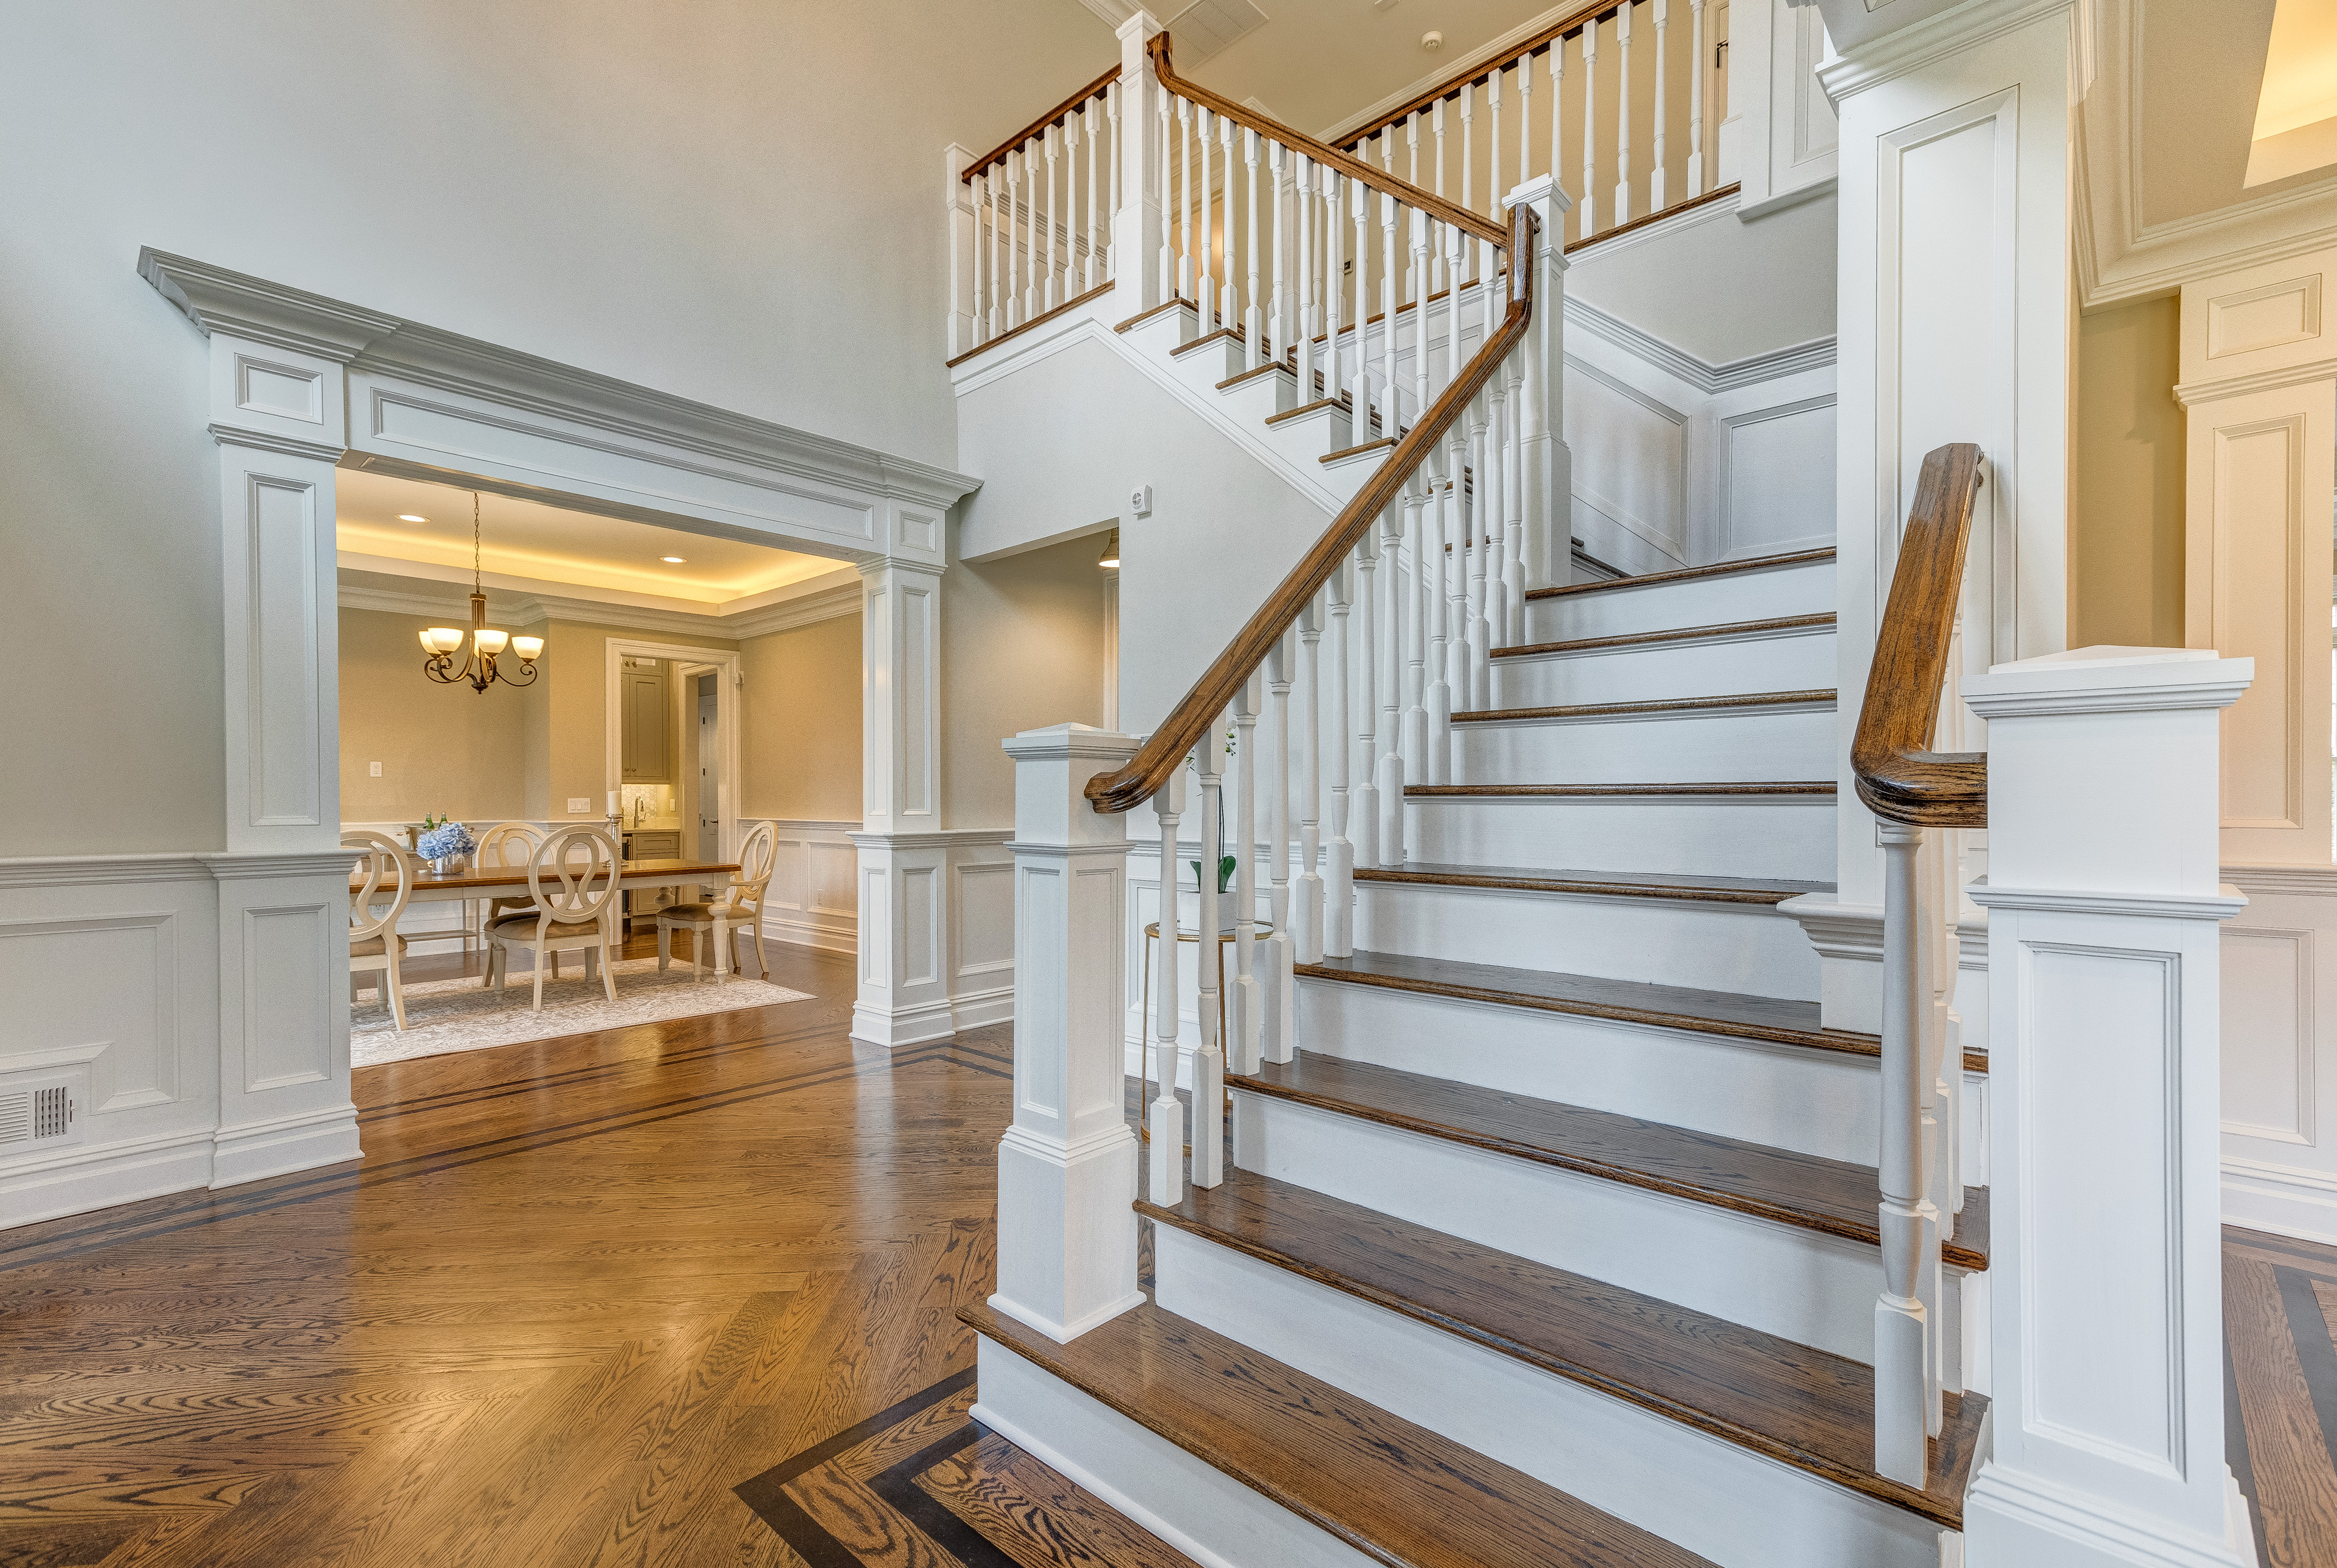 4 – 93 Slope Drive – Grand 2-Story Entrance Hall